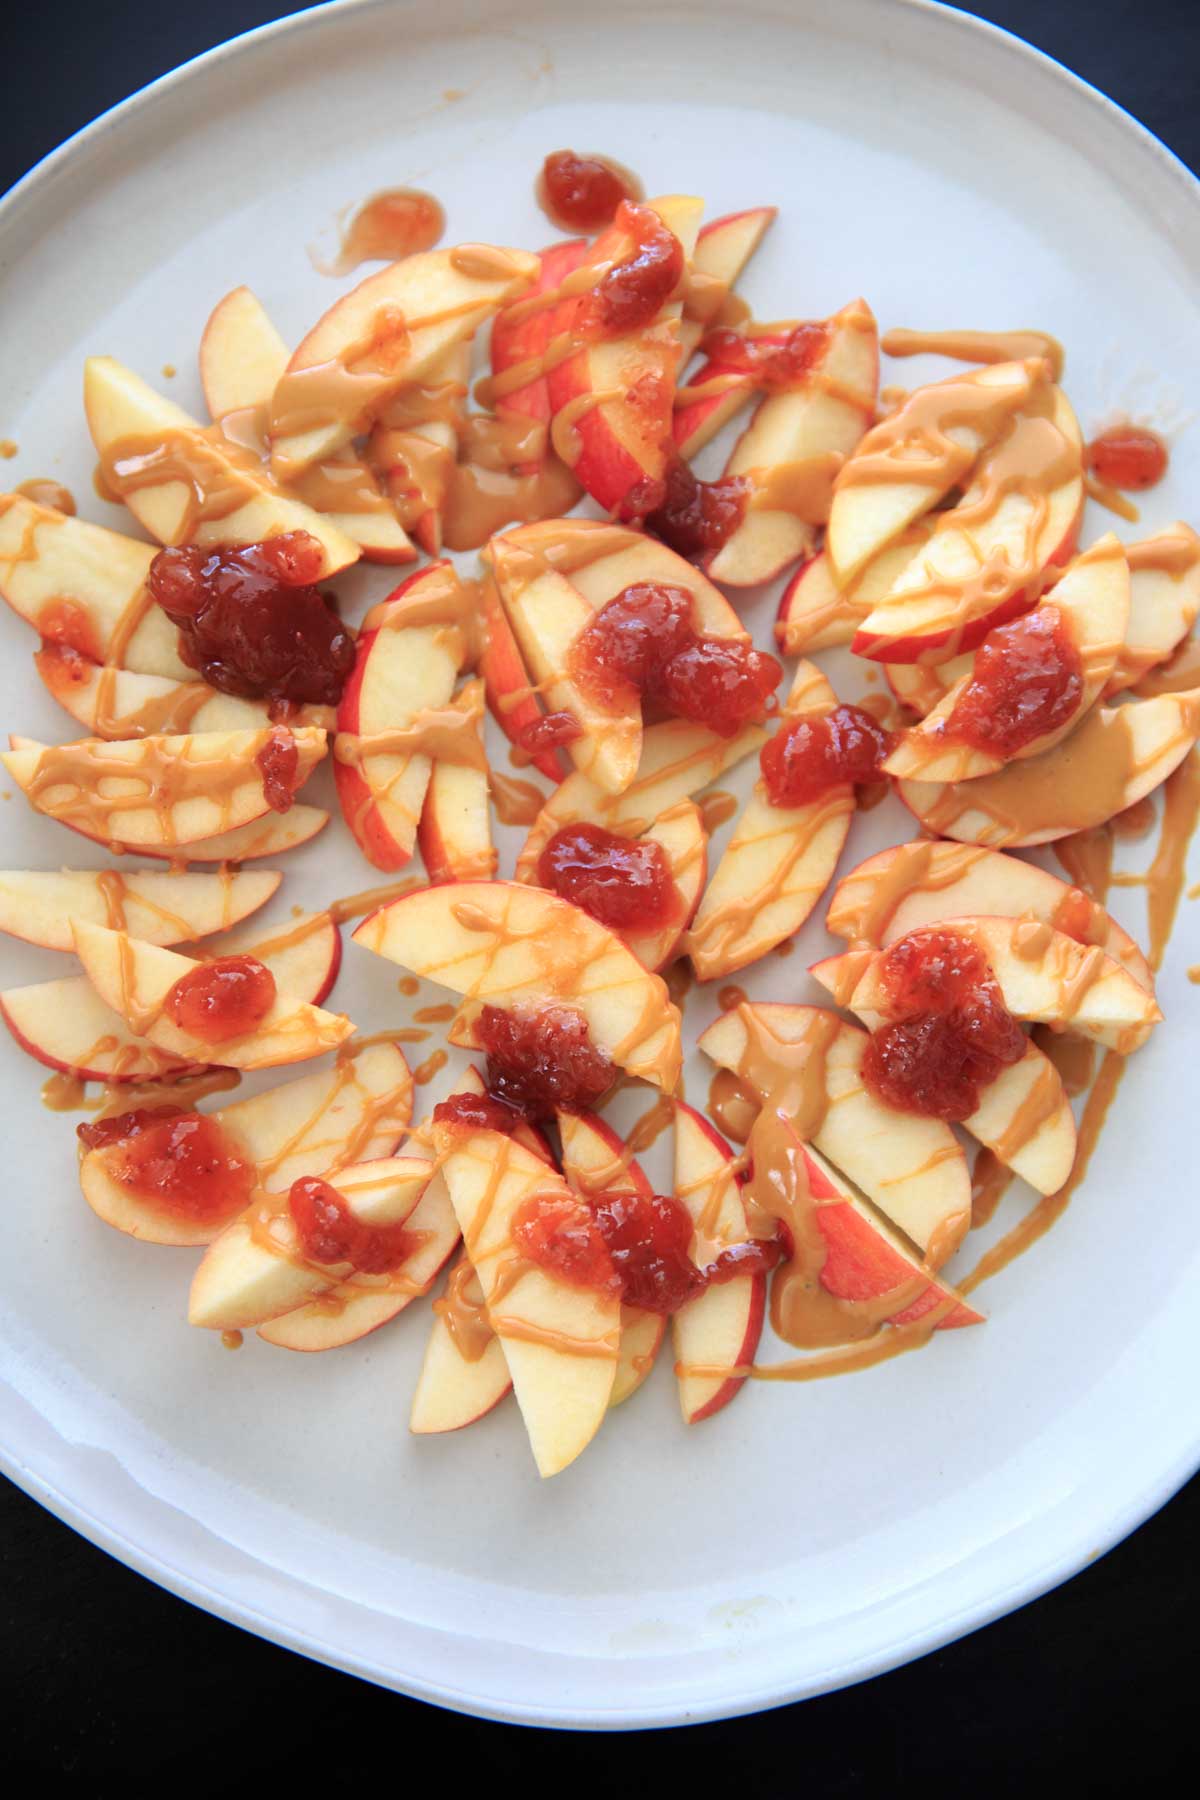 This peanut butter jelly combo on apple nachos is the perfect quick and healthy snack for kids and adults alike! Vegan, gluten-free, protein-packed and delicious.